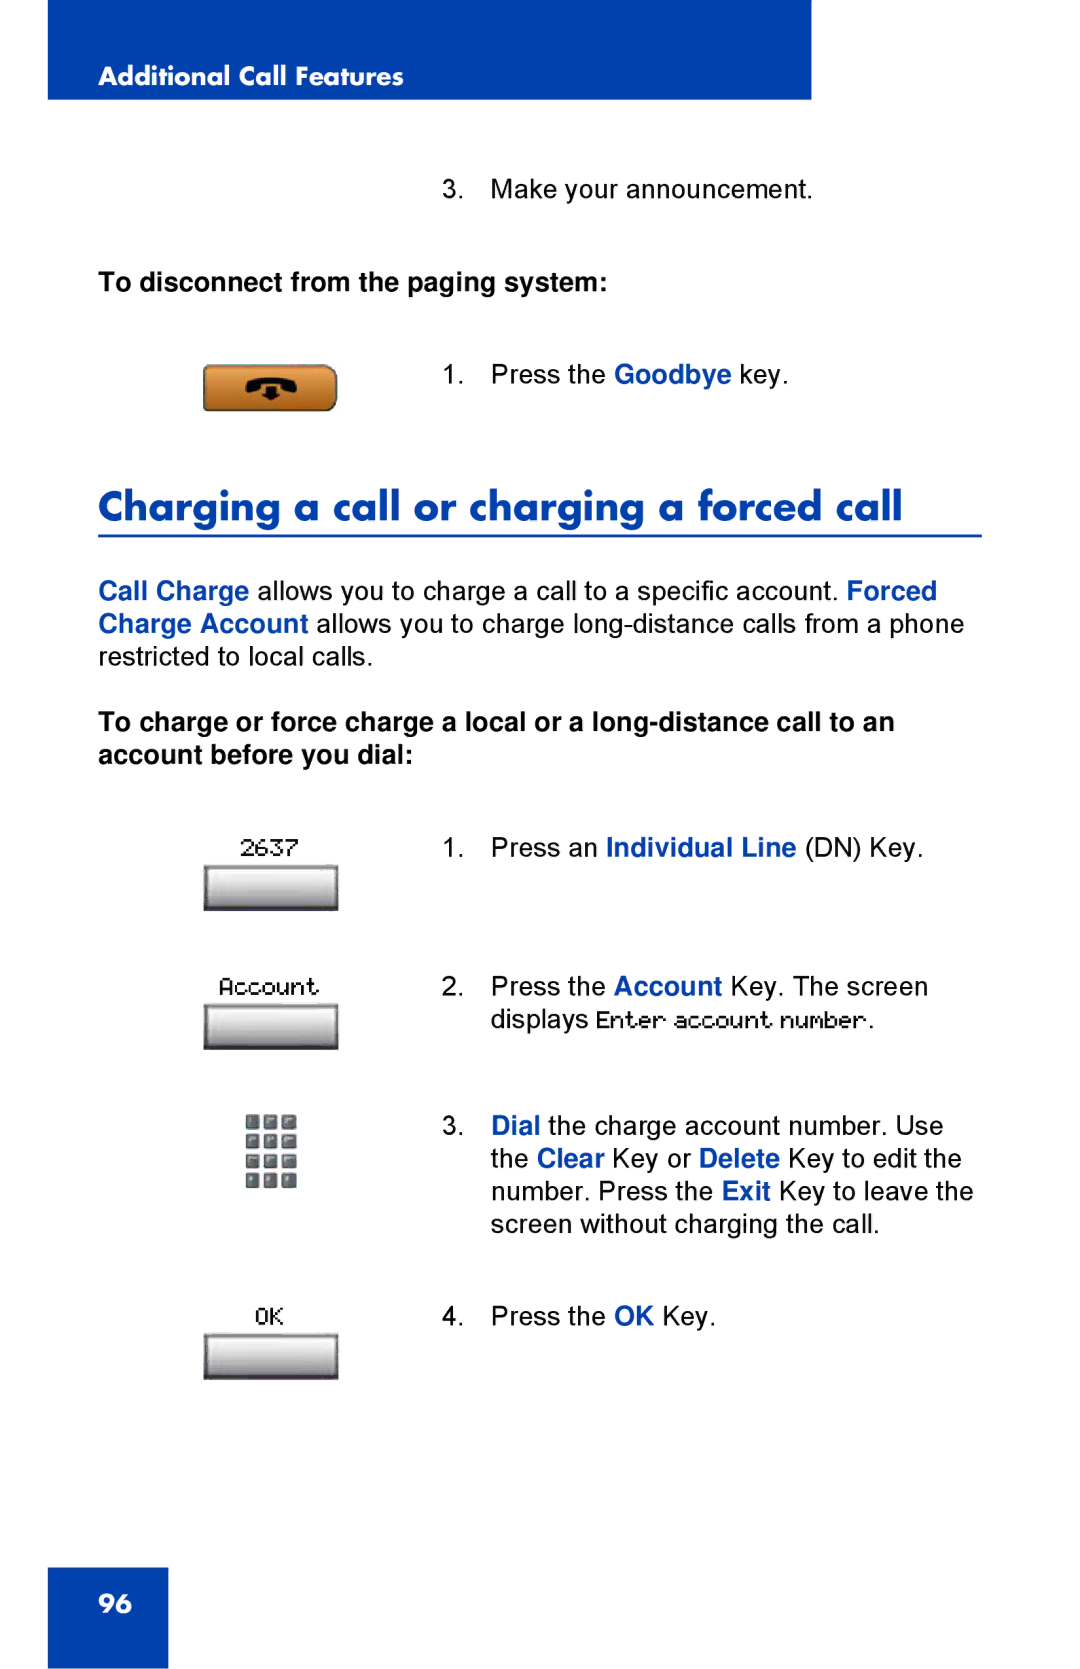 Nortel Networks 1150E manual Charging a call or charging a forced call, To disconnect from the paging system 